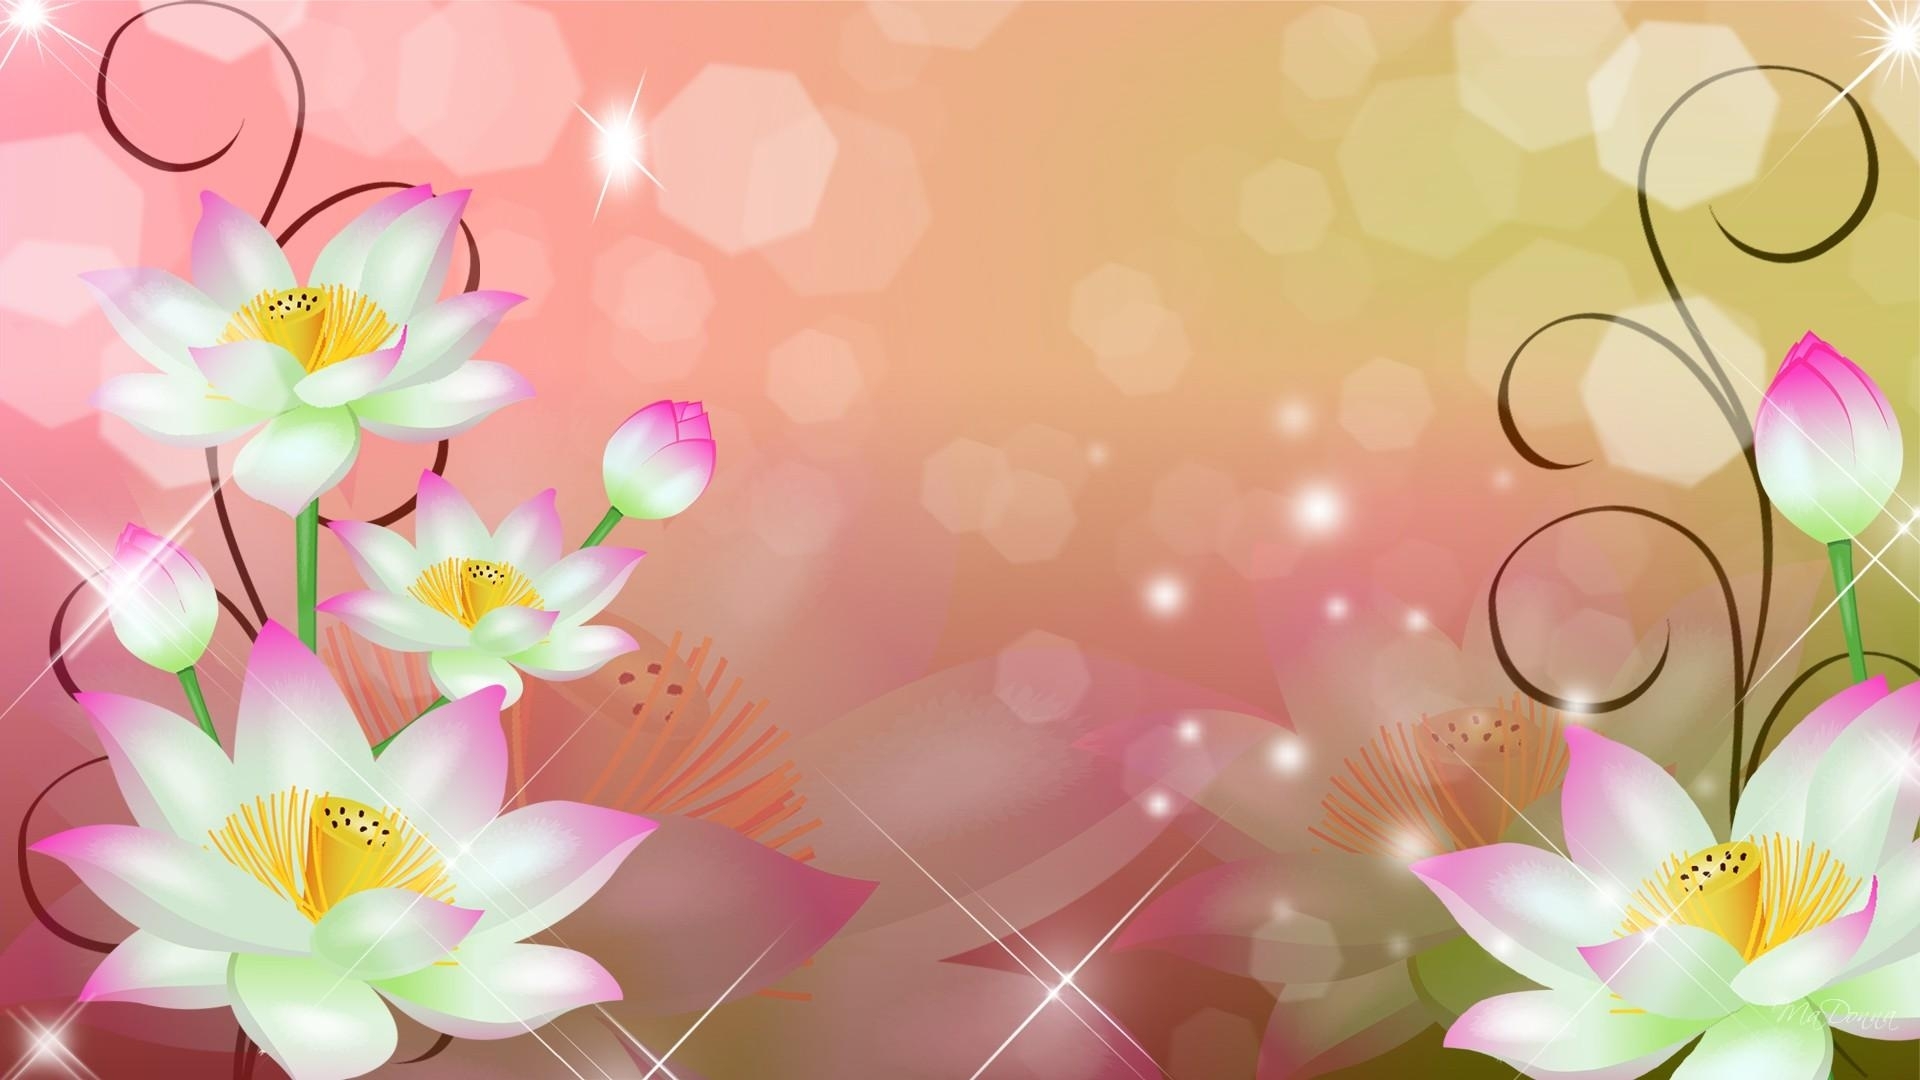 Flowers Abstract Backgrounds